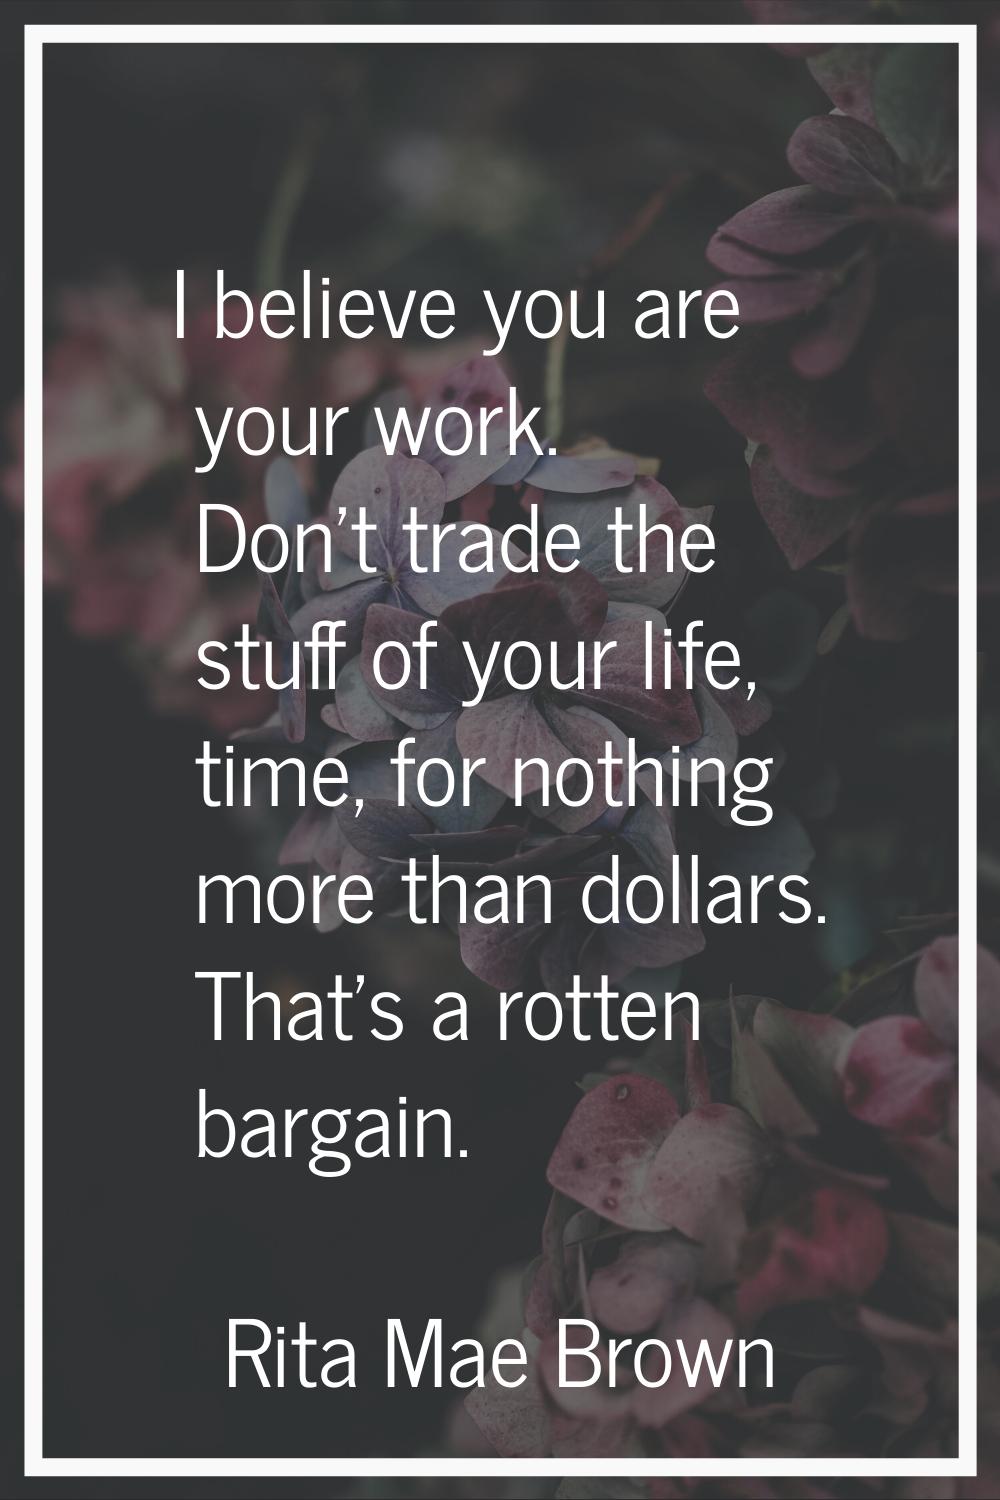 I believe you are your work. Don't trade the stuff of your life, time, for nothing more than dollar